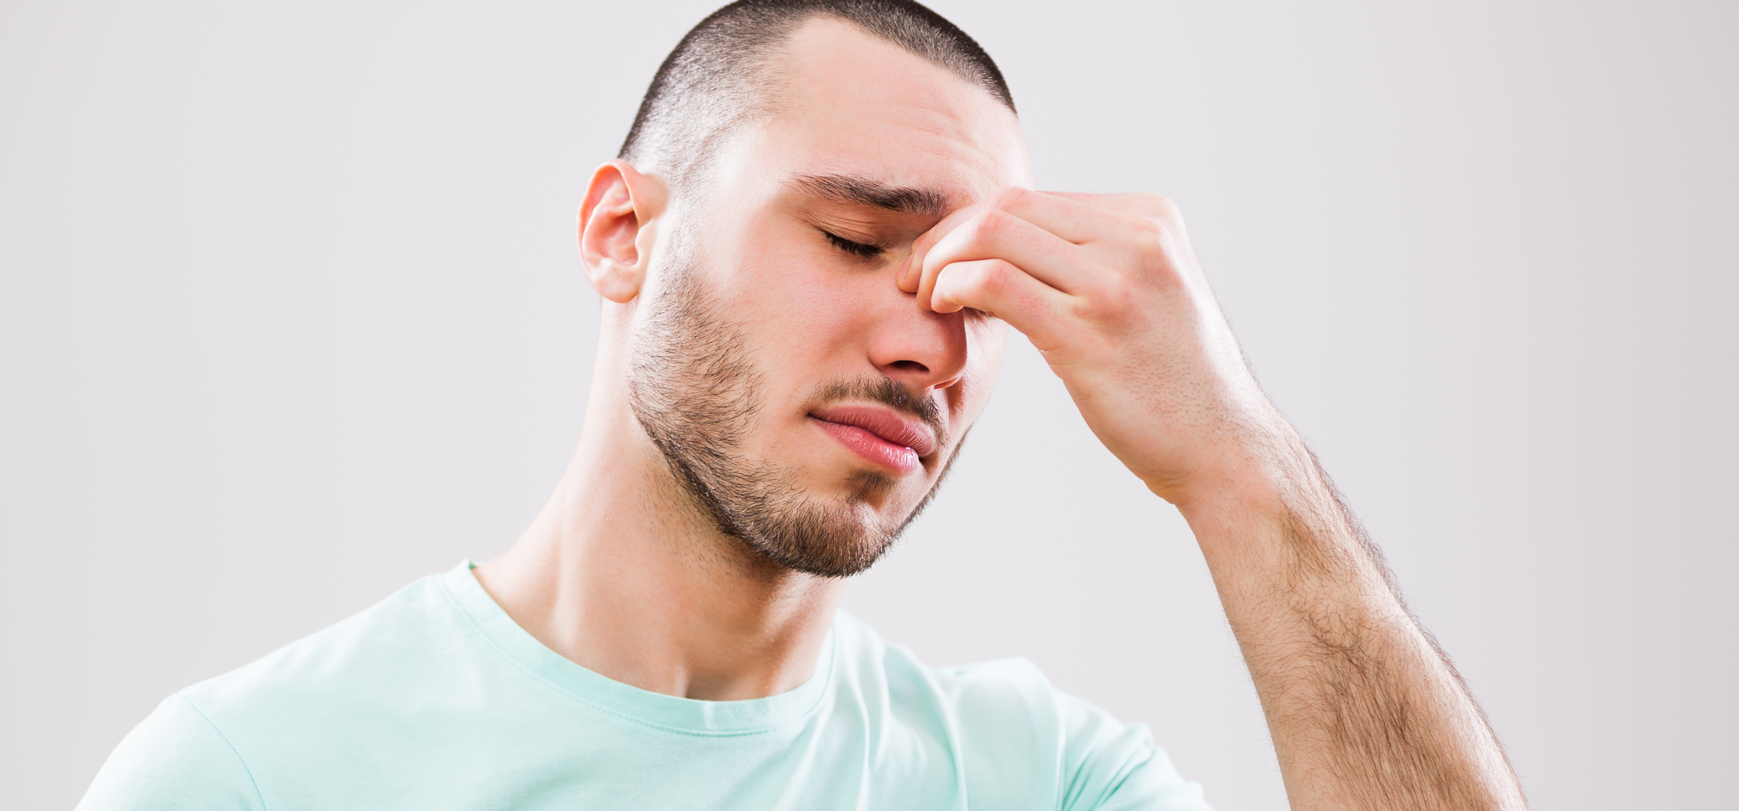 Reasons for consultation - What is sinusitis? - Lobe